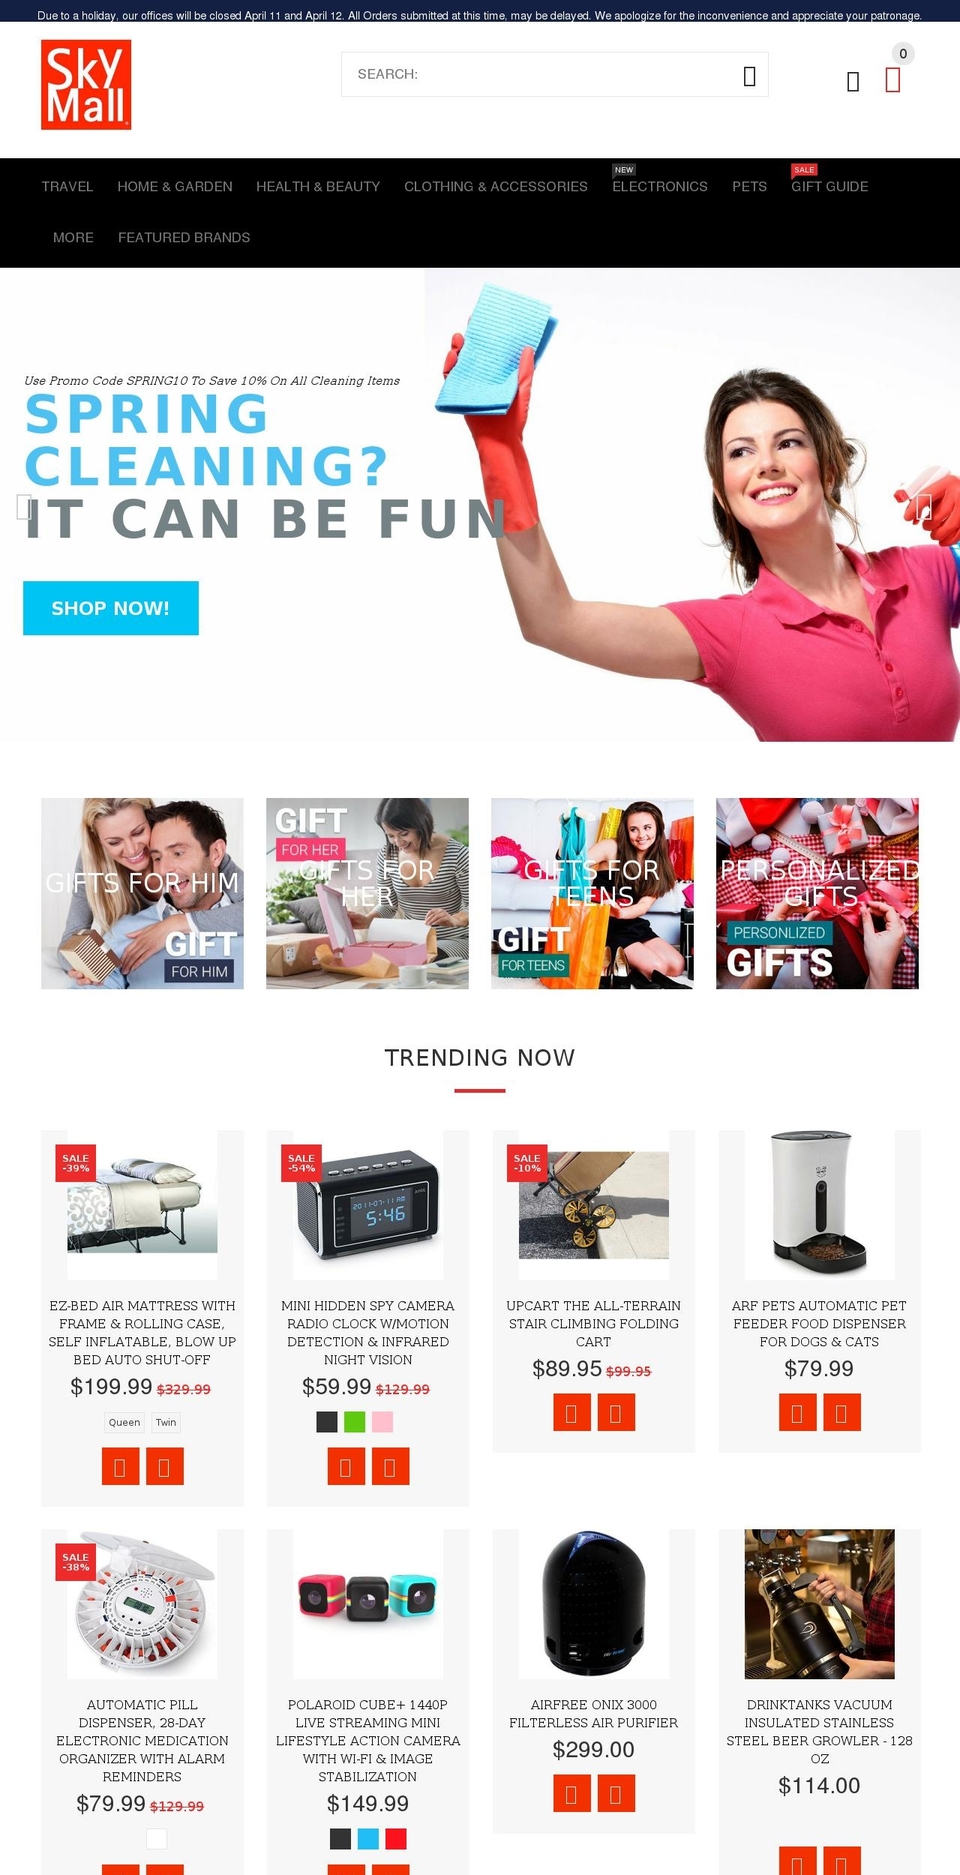 YourStore-V2-0-1A Shopify theme site example skymall.mobi